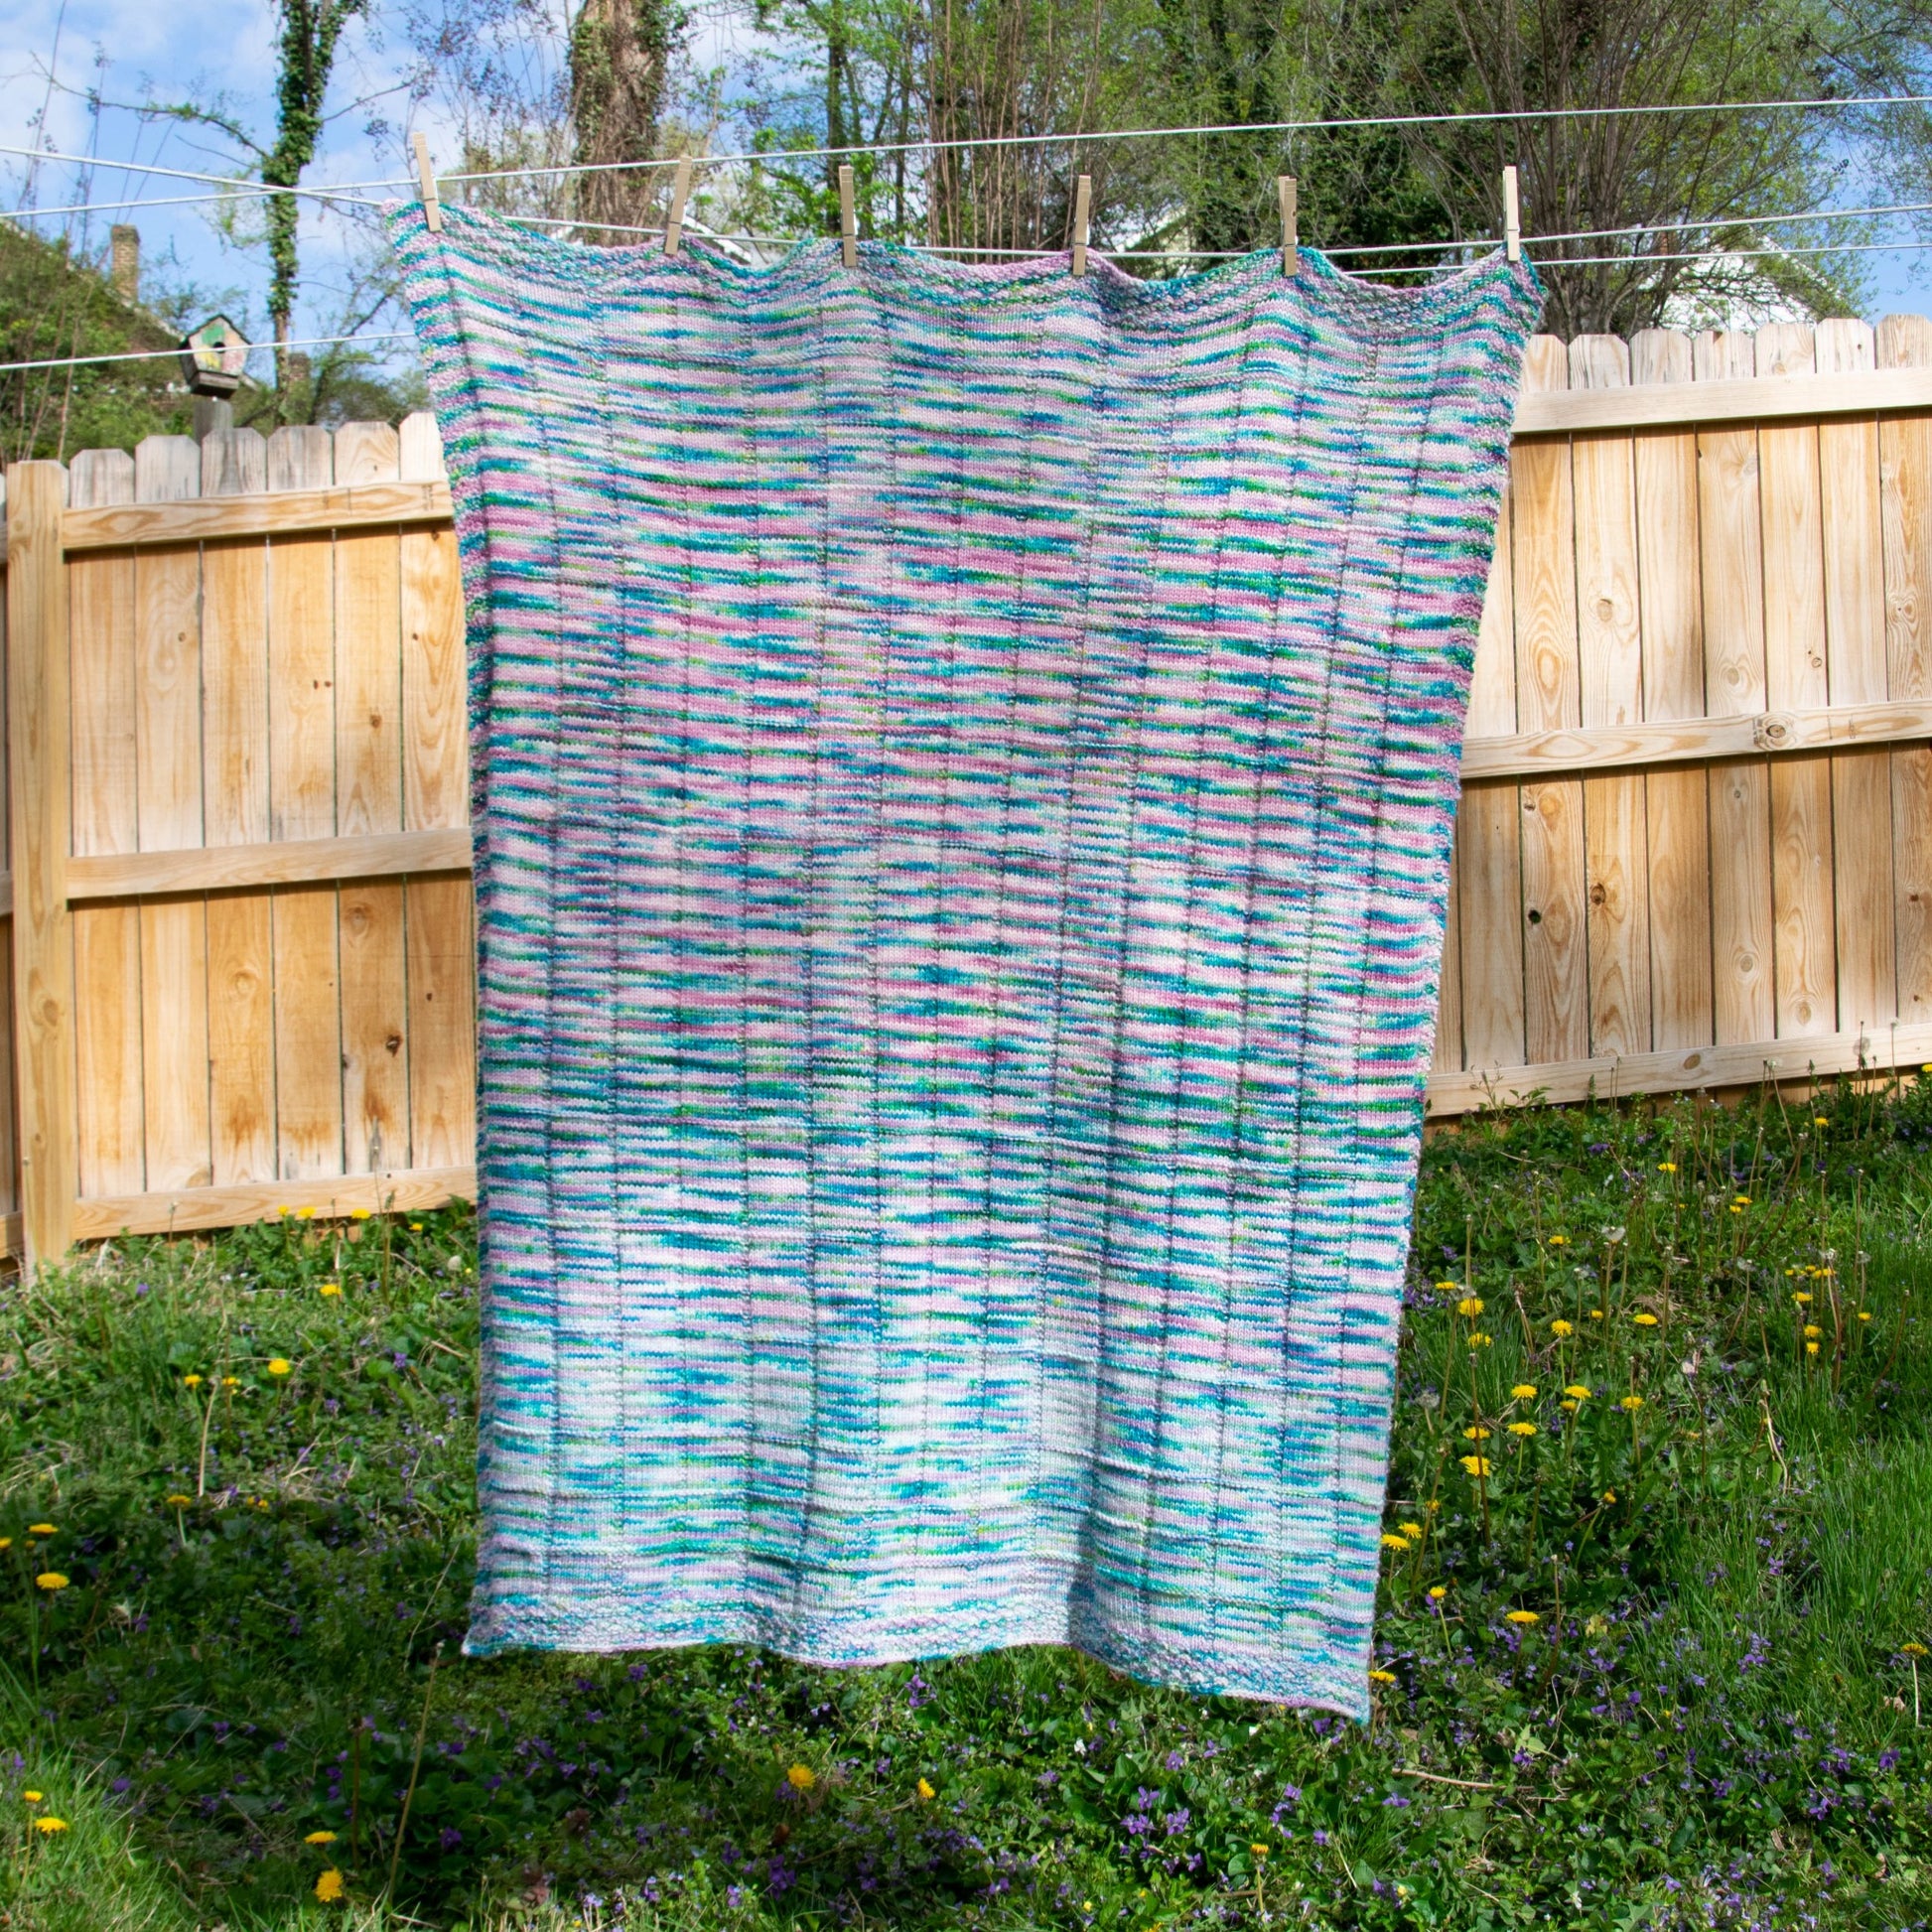 A full view of the Triple Pane blanket hanging on a clothesline, showing that the design is symmetrical across the short axis.